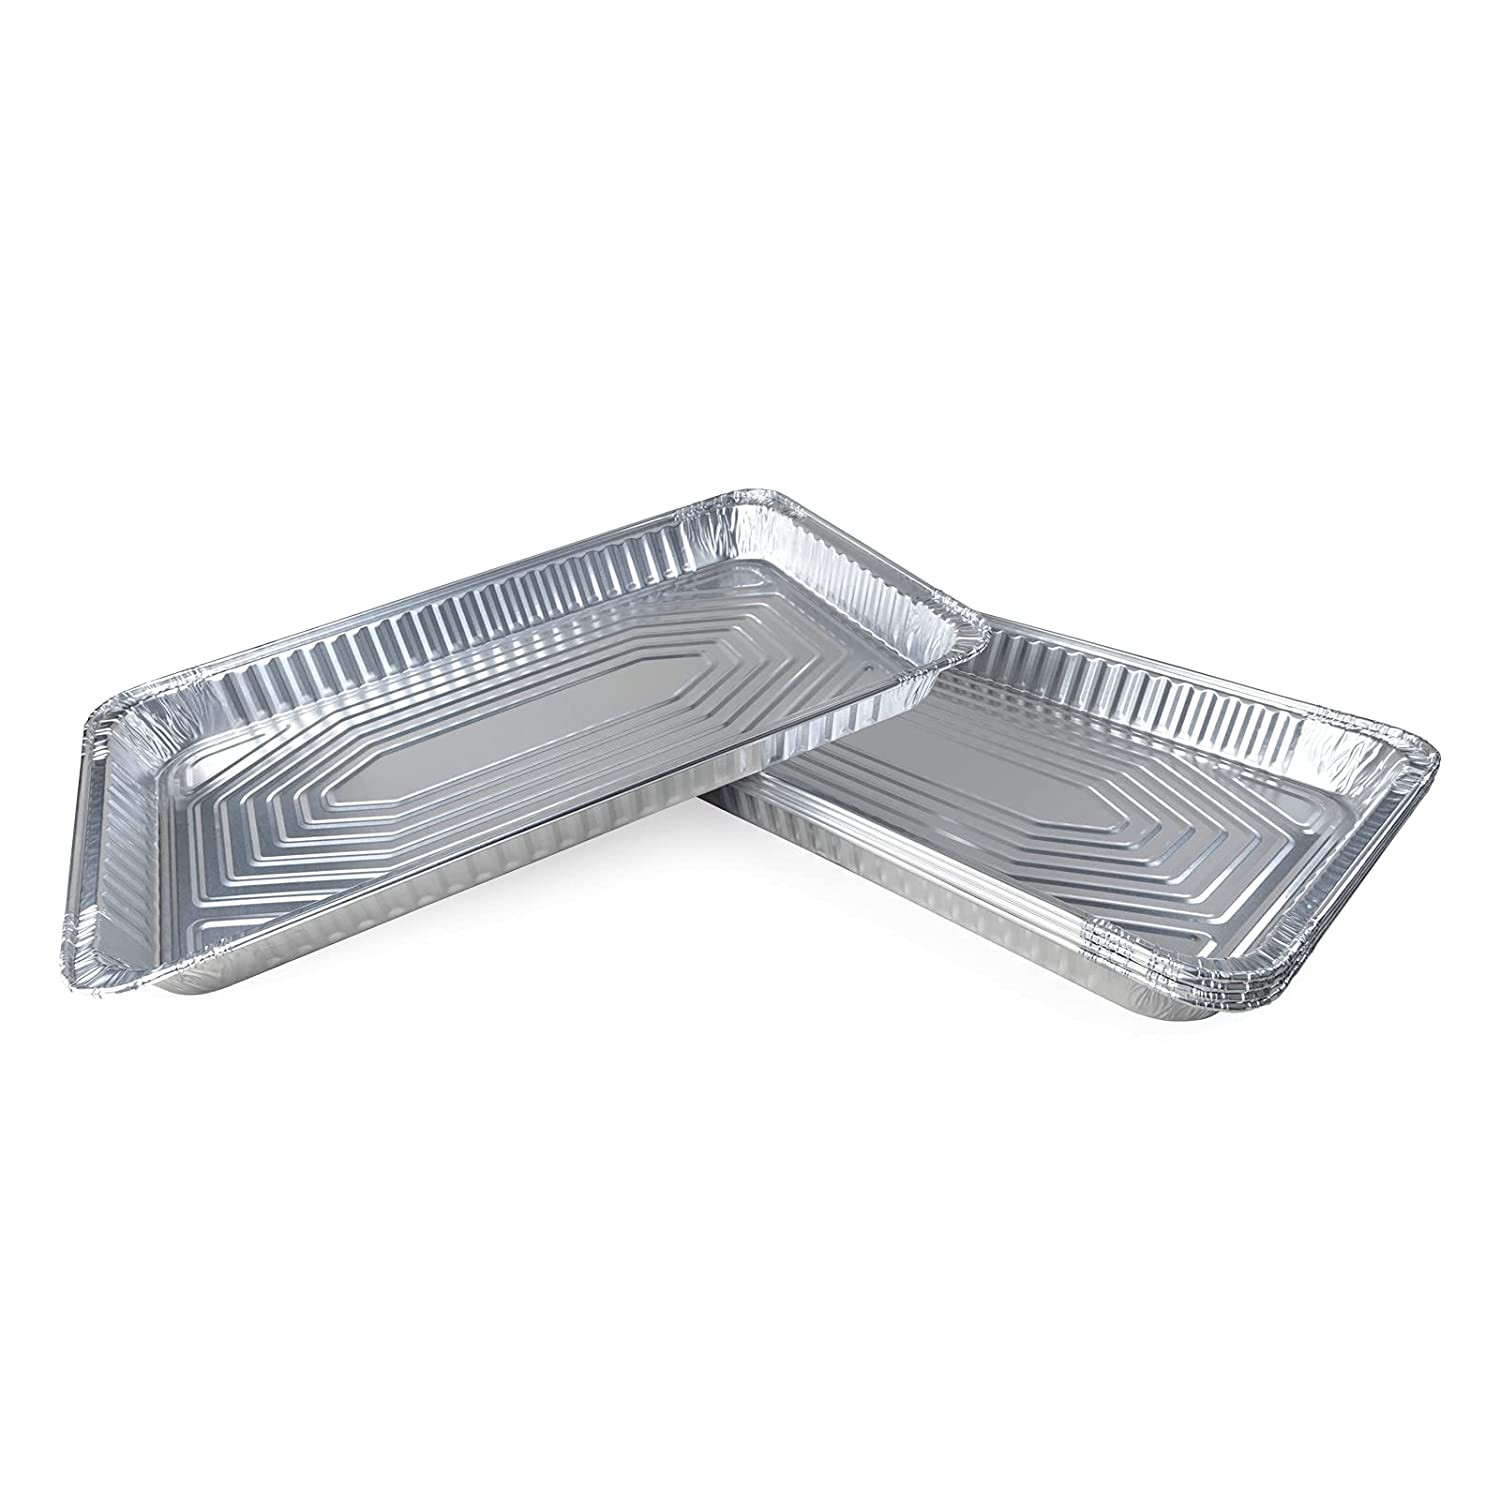 https://idlpack.com/image/cache/catalog/Products/Foil%20Pans%20and%20Trays/61aW81DpPWL._SL1500_-1500x1500.jpg